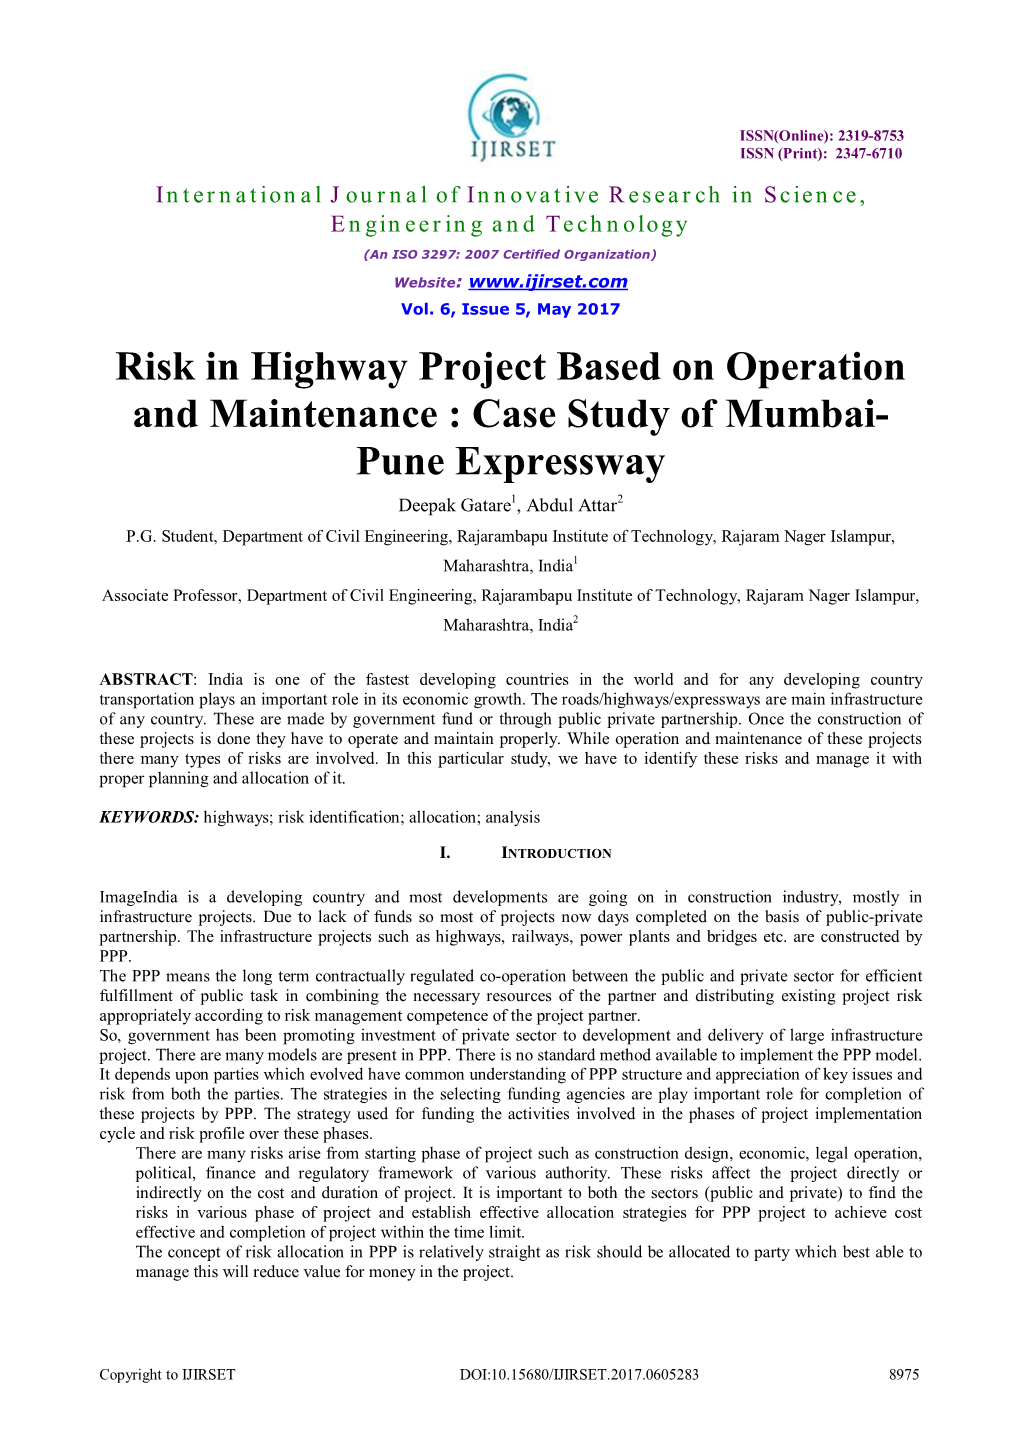 Risk in Highway Project Based on Operation and Maintenance : Case Study of Mumbai- Pune Expressway Deepak Gatare1, Abdul Attar2 P.G